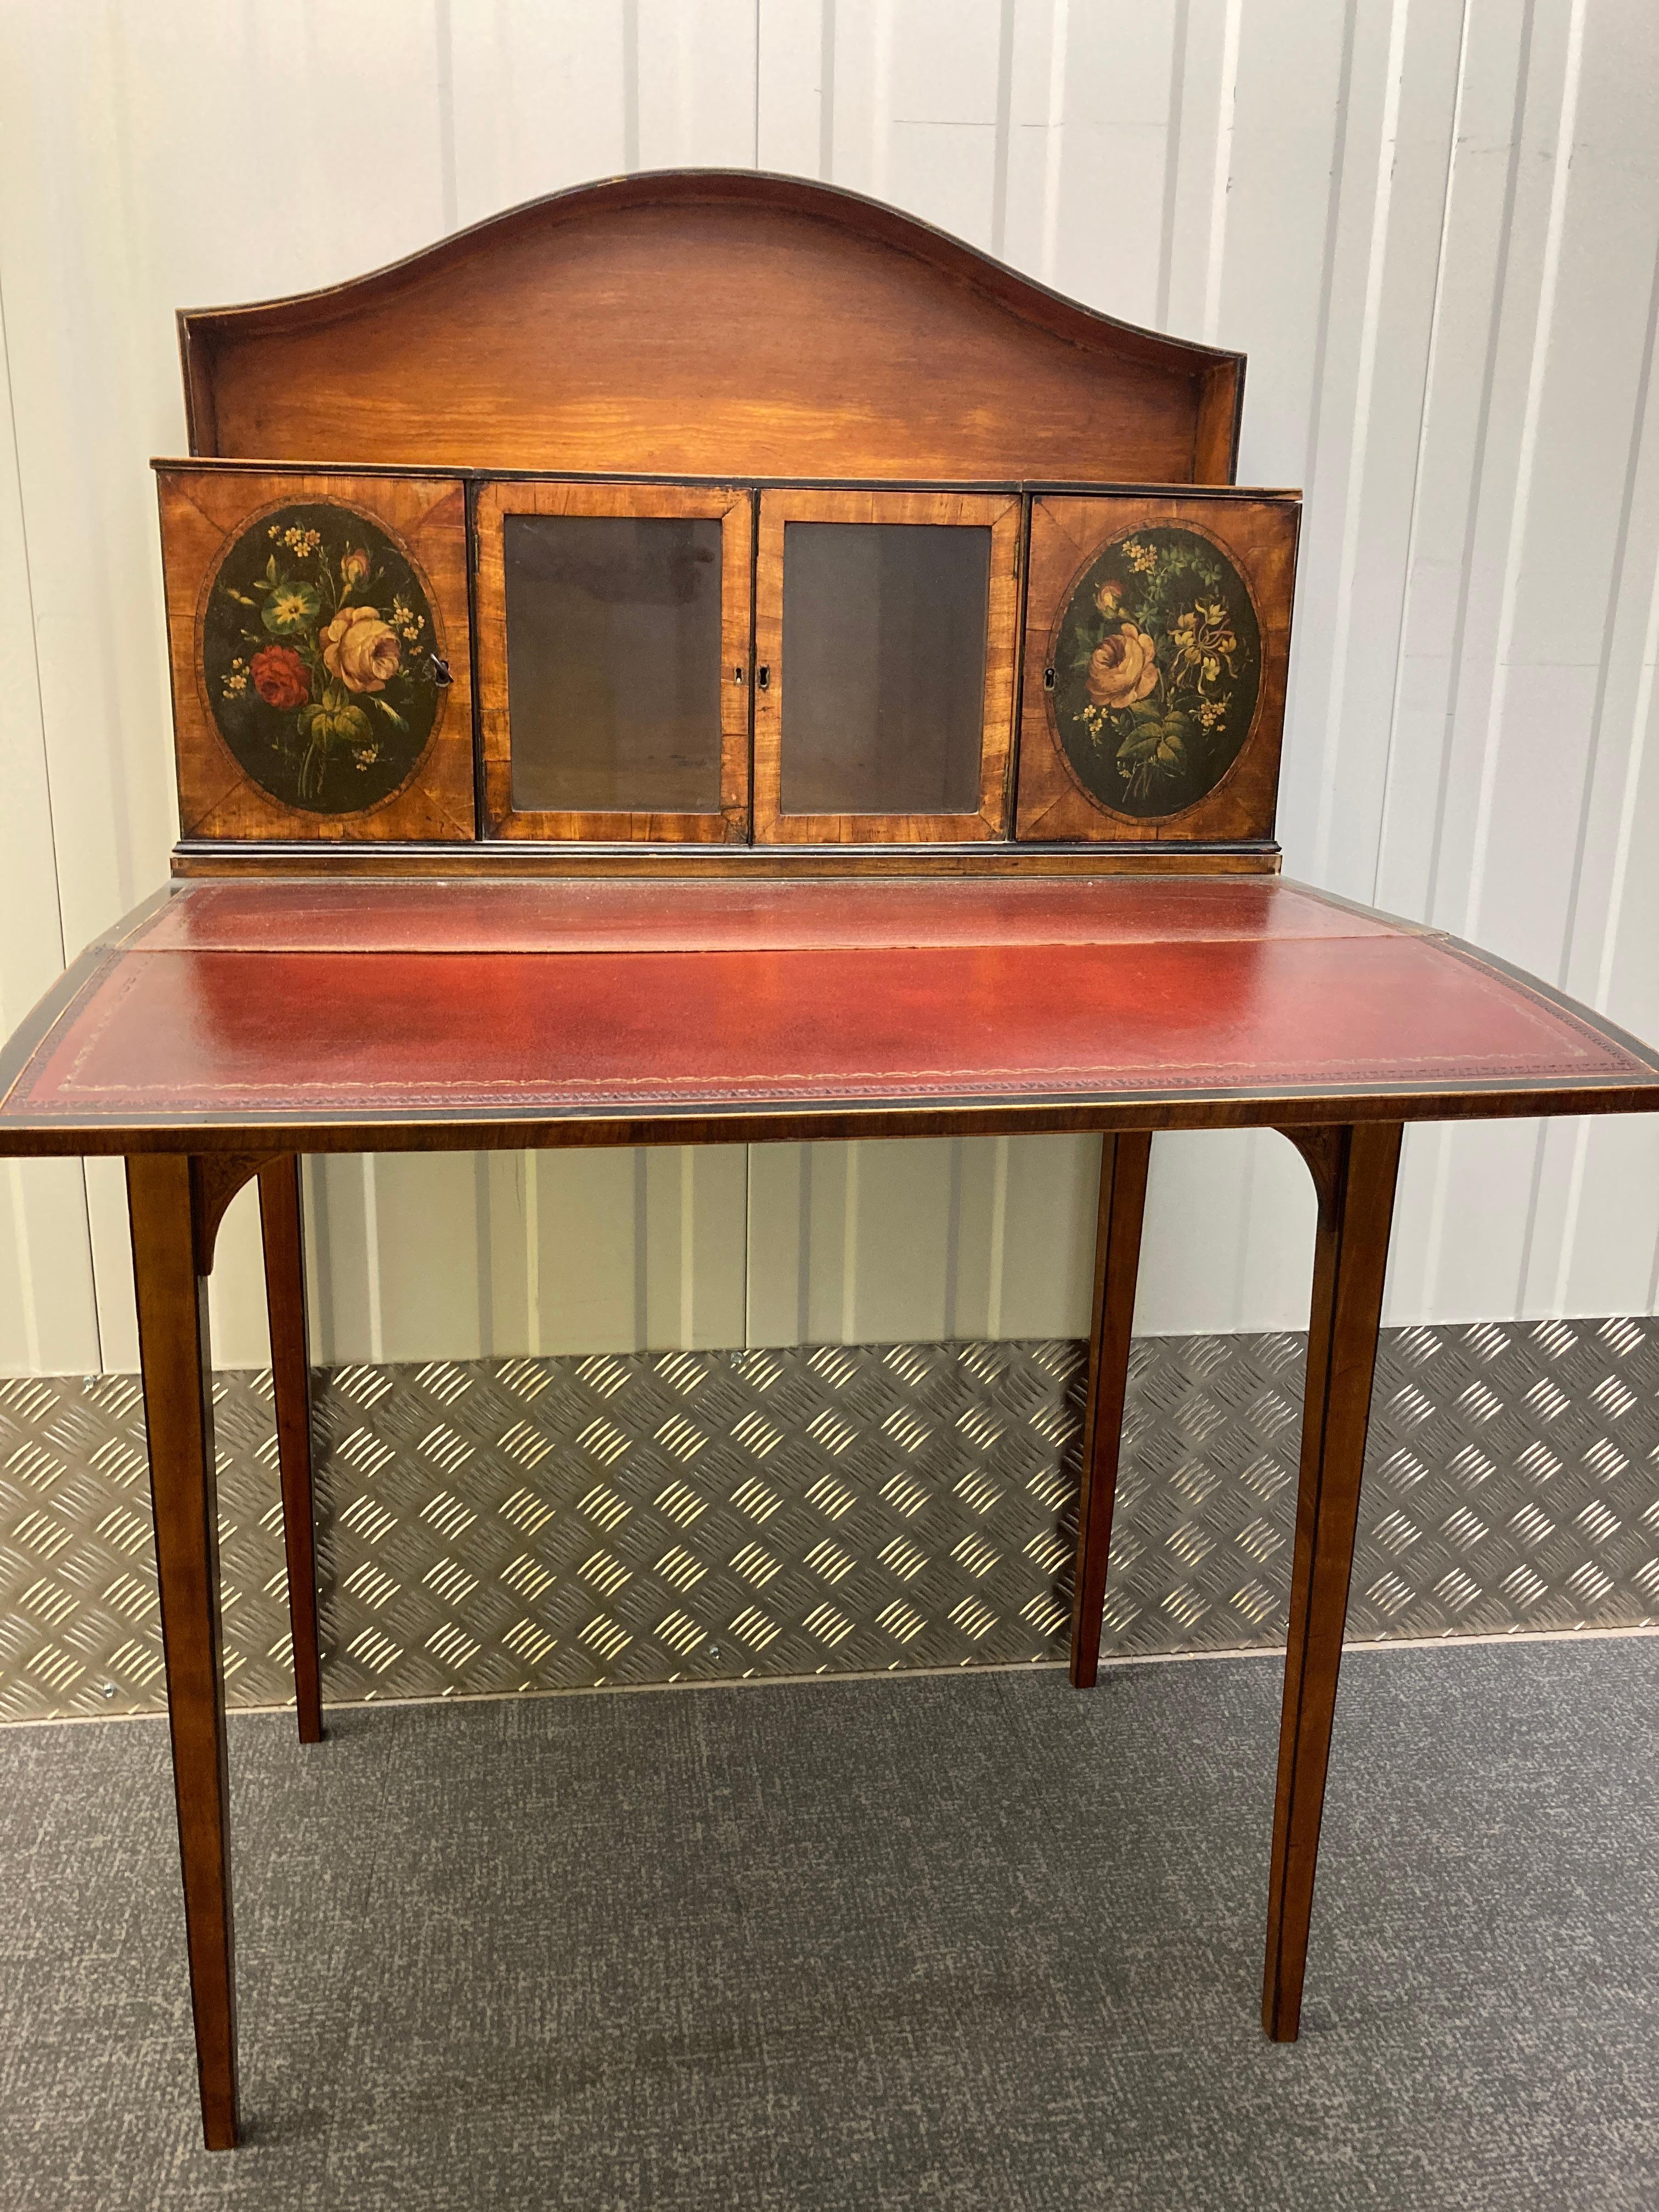 A Satinwood Bonheur du Jour with painted panels and glazed doors, maroon leather writing fold, ebony inlaid square tapering legs and painted brackets. After a design by Hepplewhite. English circa 1790  